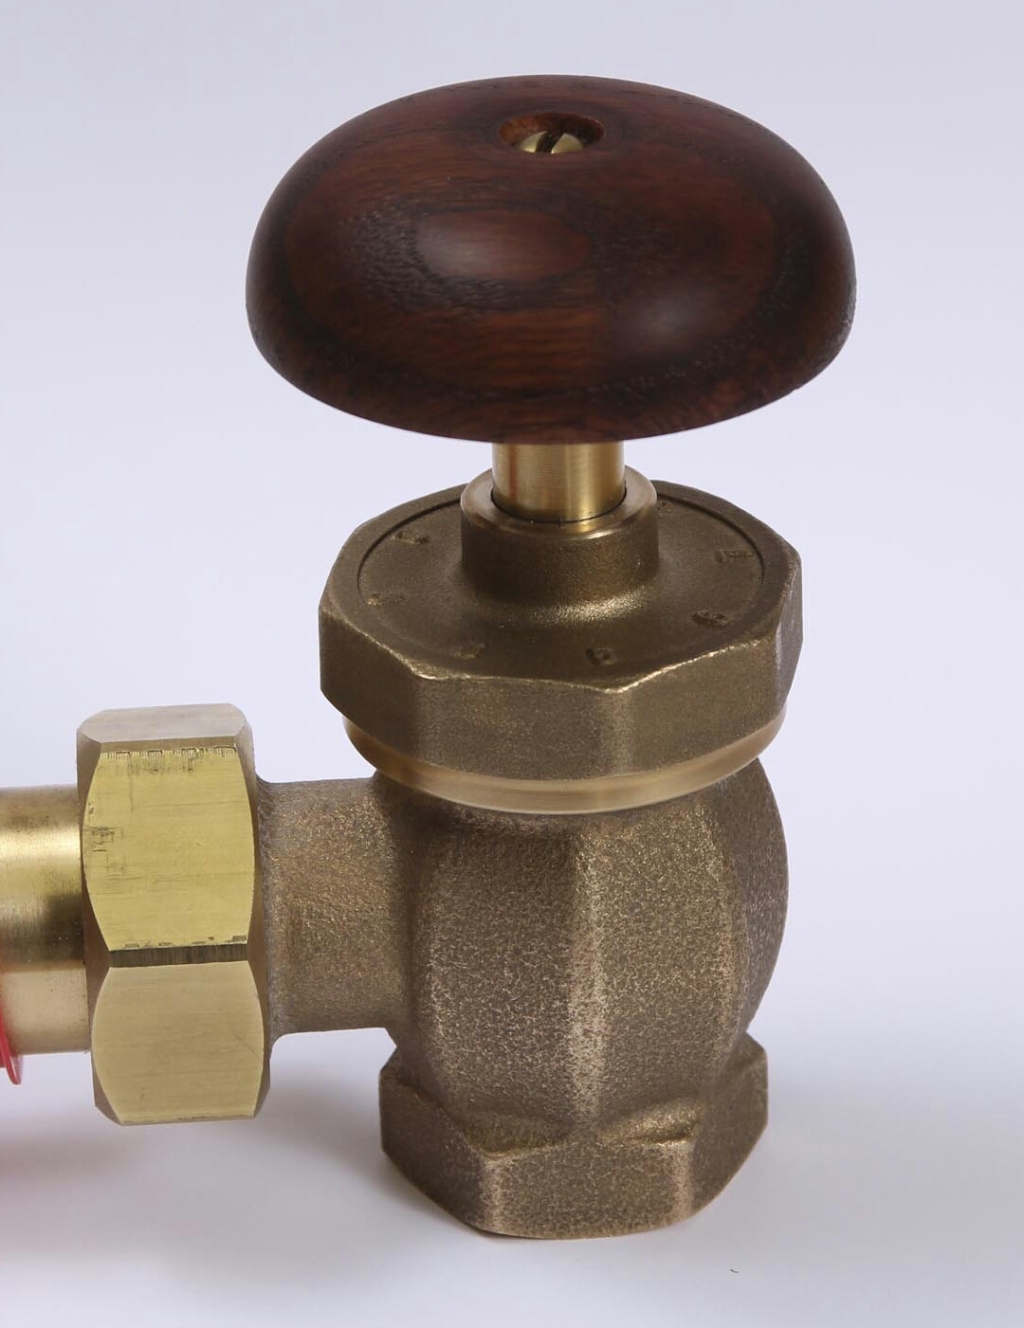 Wooden Handle Radiator Valves with a plain finish.